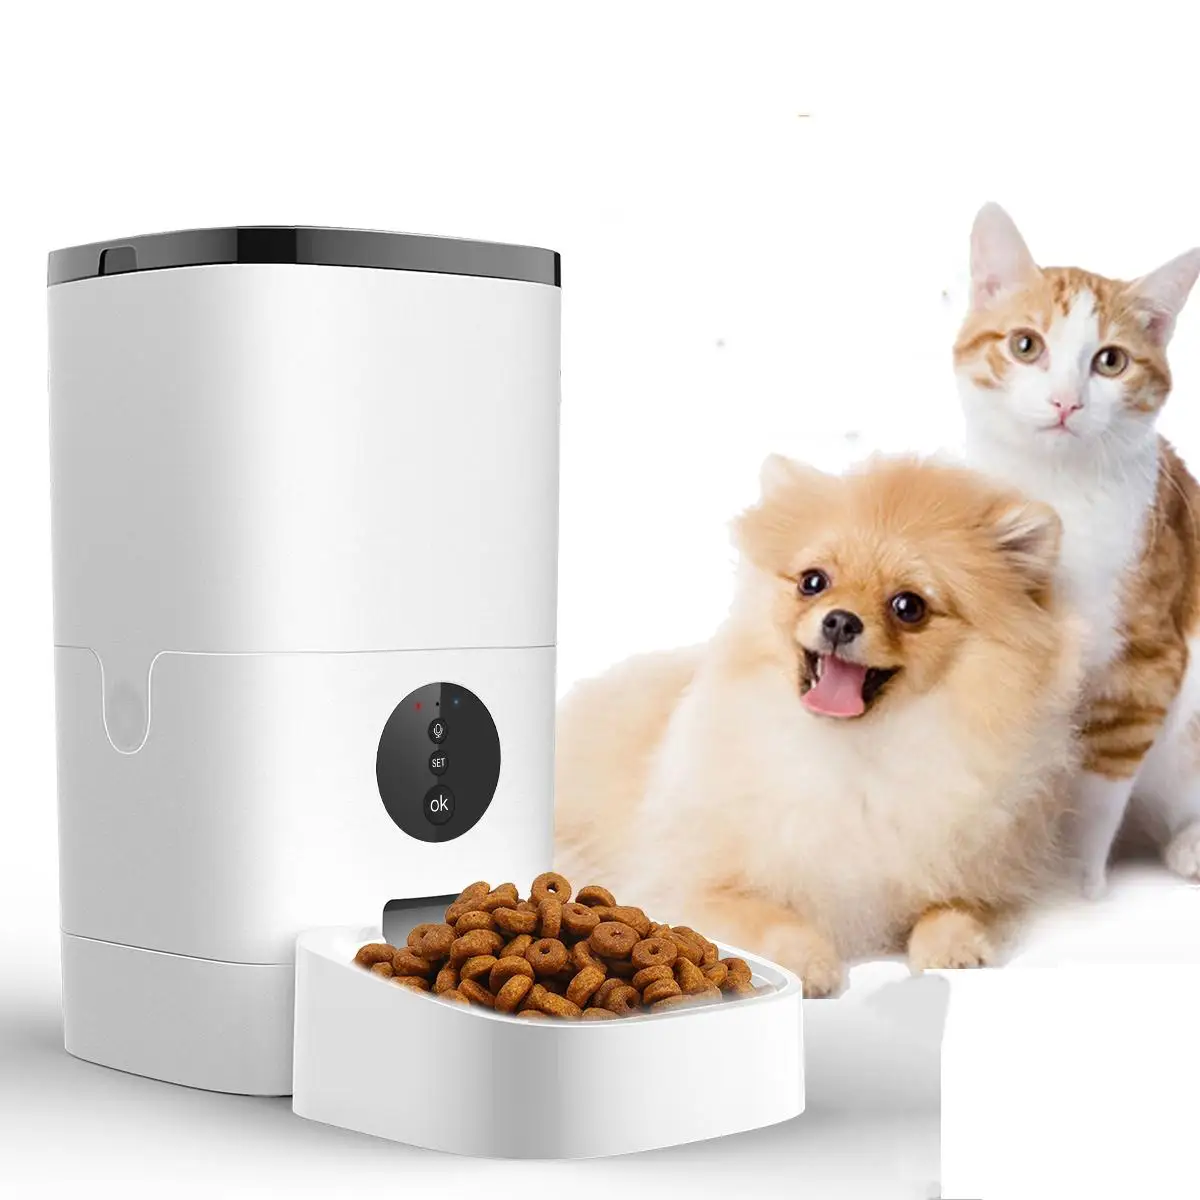 

TUYA Smart Pet Feeder with Camera and Two-way Audio-Remote Control Feeding WIFI Connect APP Phone for Dogs and Cats Night Vision